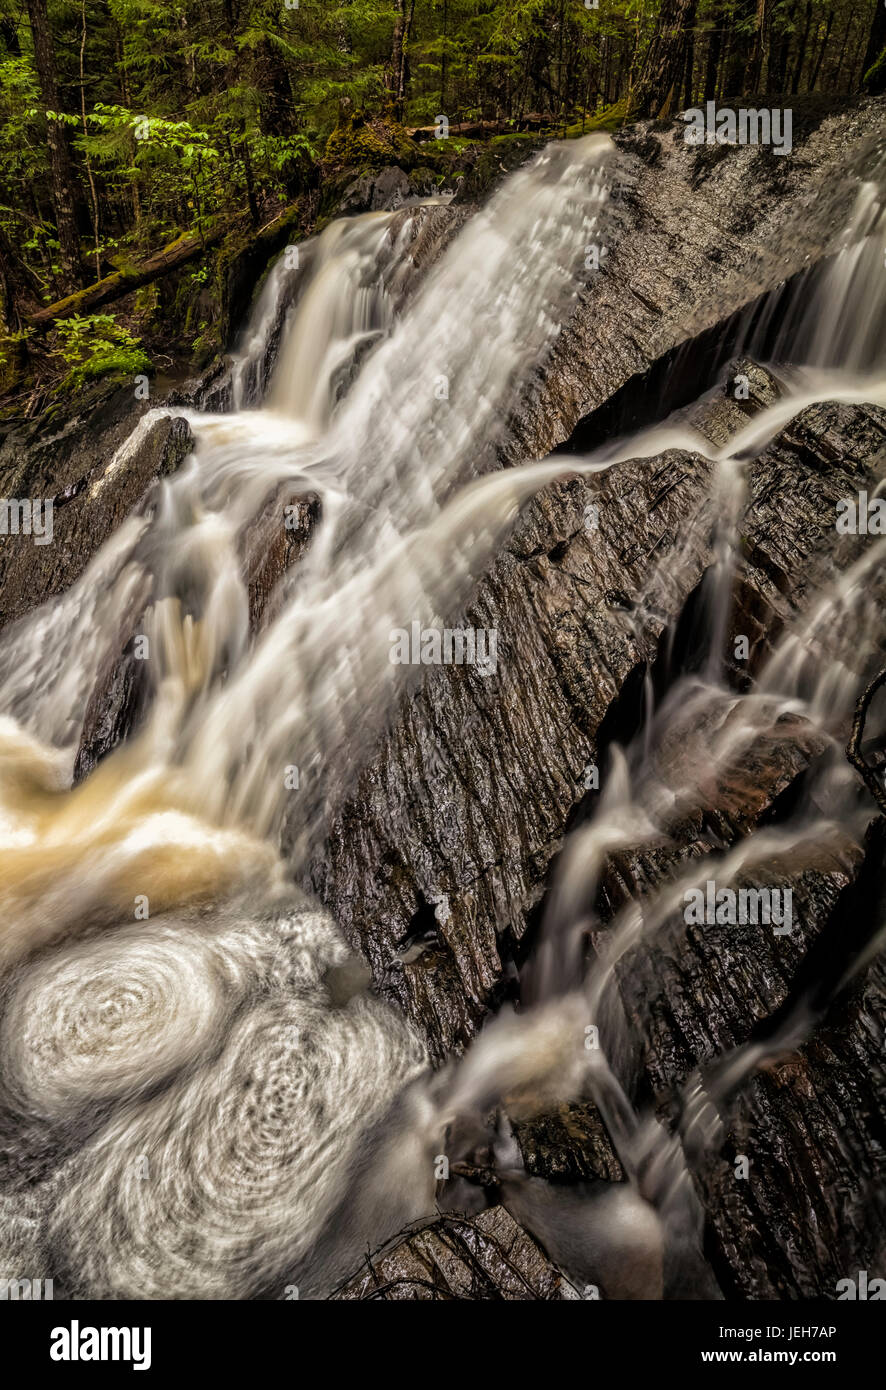 A spring waterfall in the forest; Middle Sackville, Nova Scotia, Canada Stock Photo